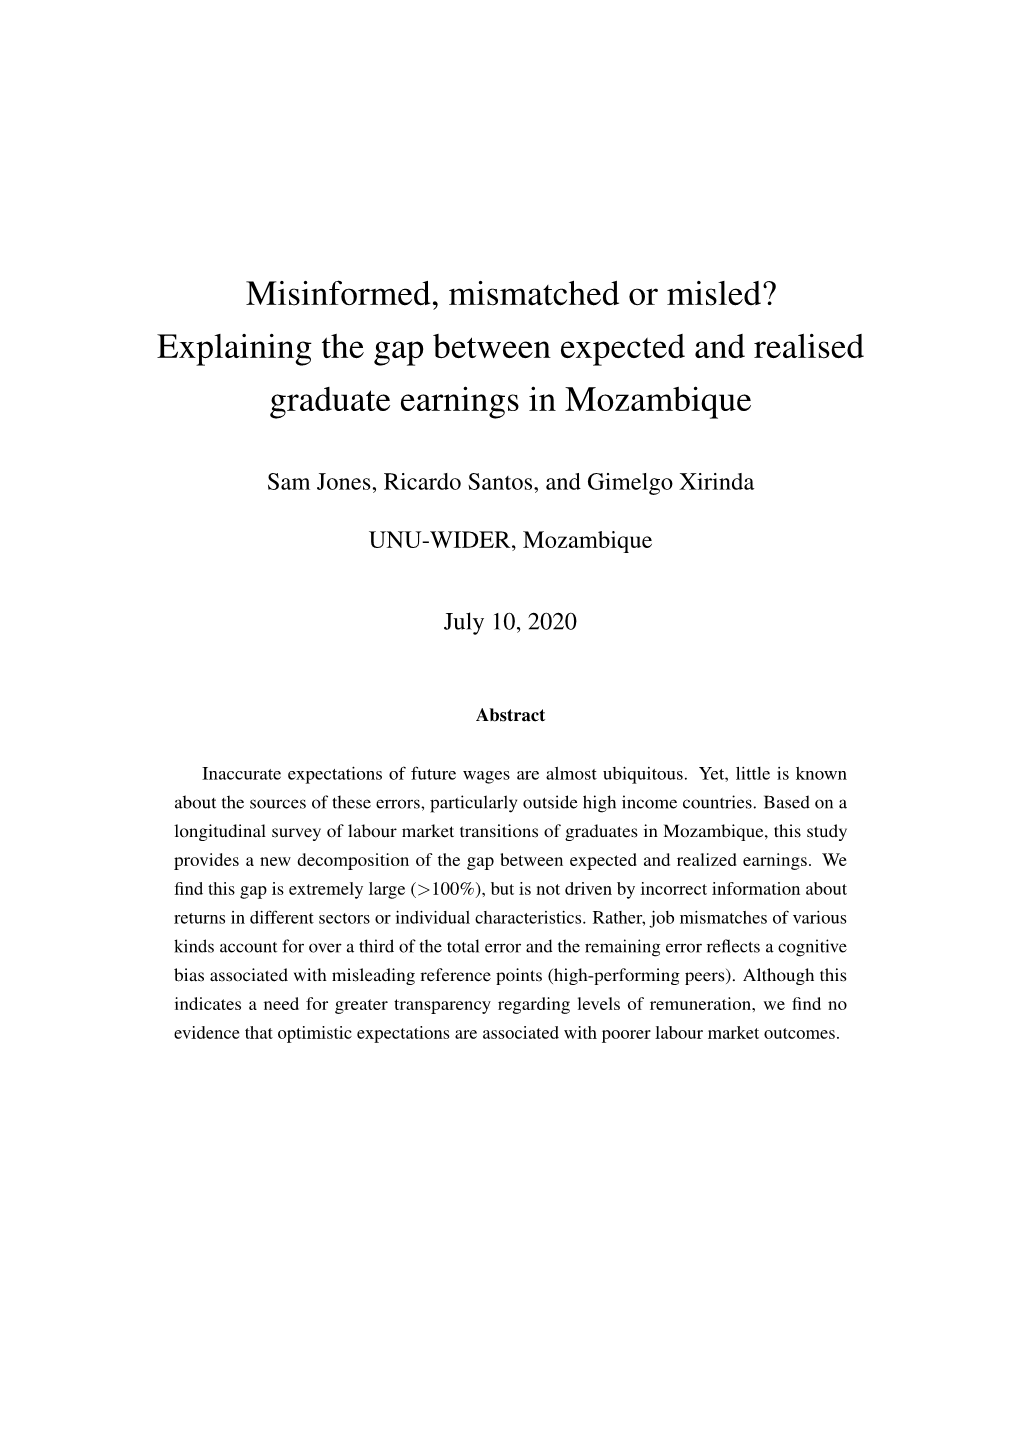 Misinformed, Mismatched Or Misled? Explaining the Gap Between Expected and Realised Graduate Earnings in Mozambique